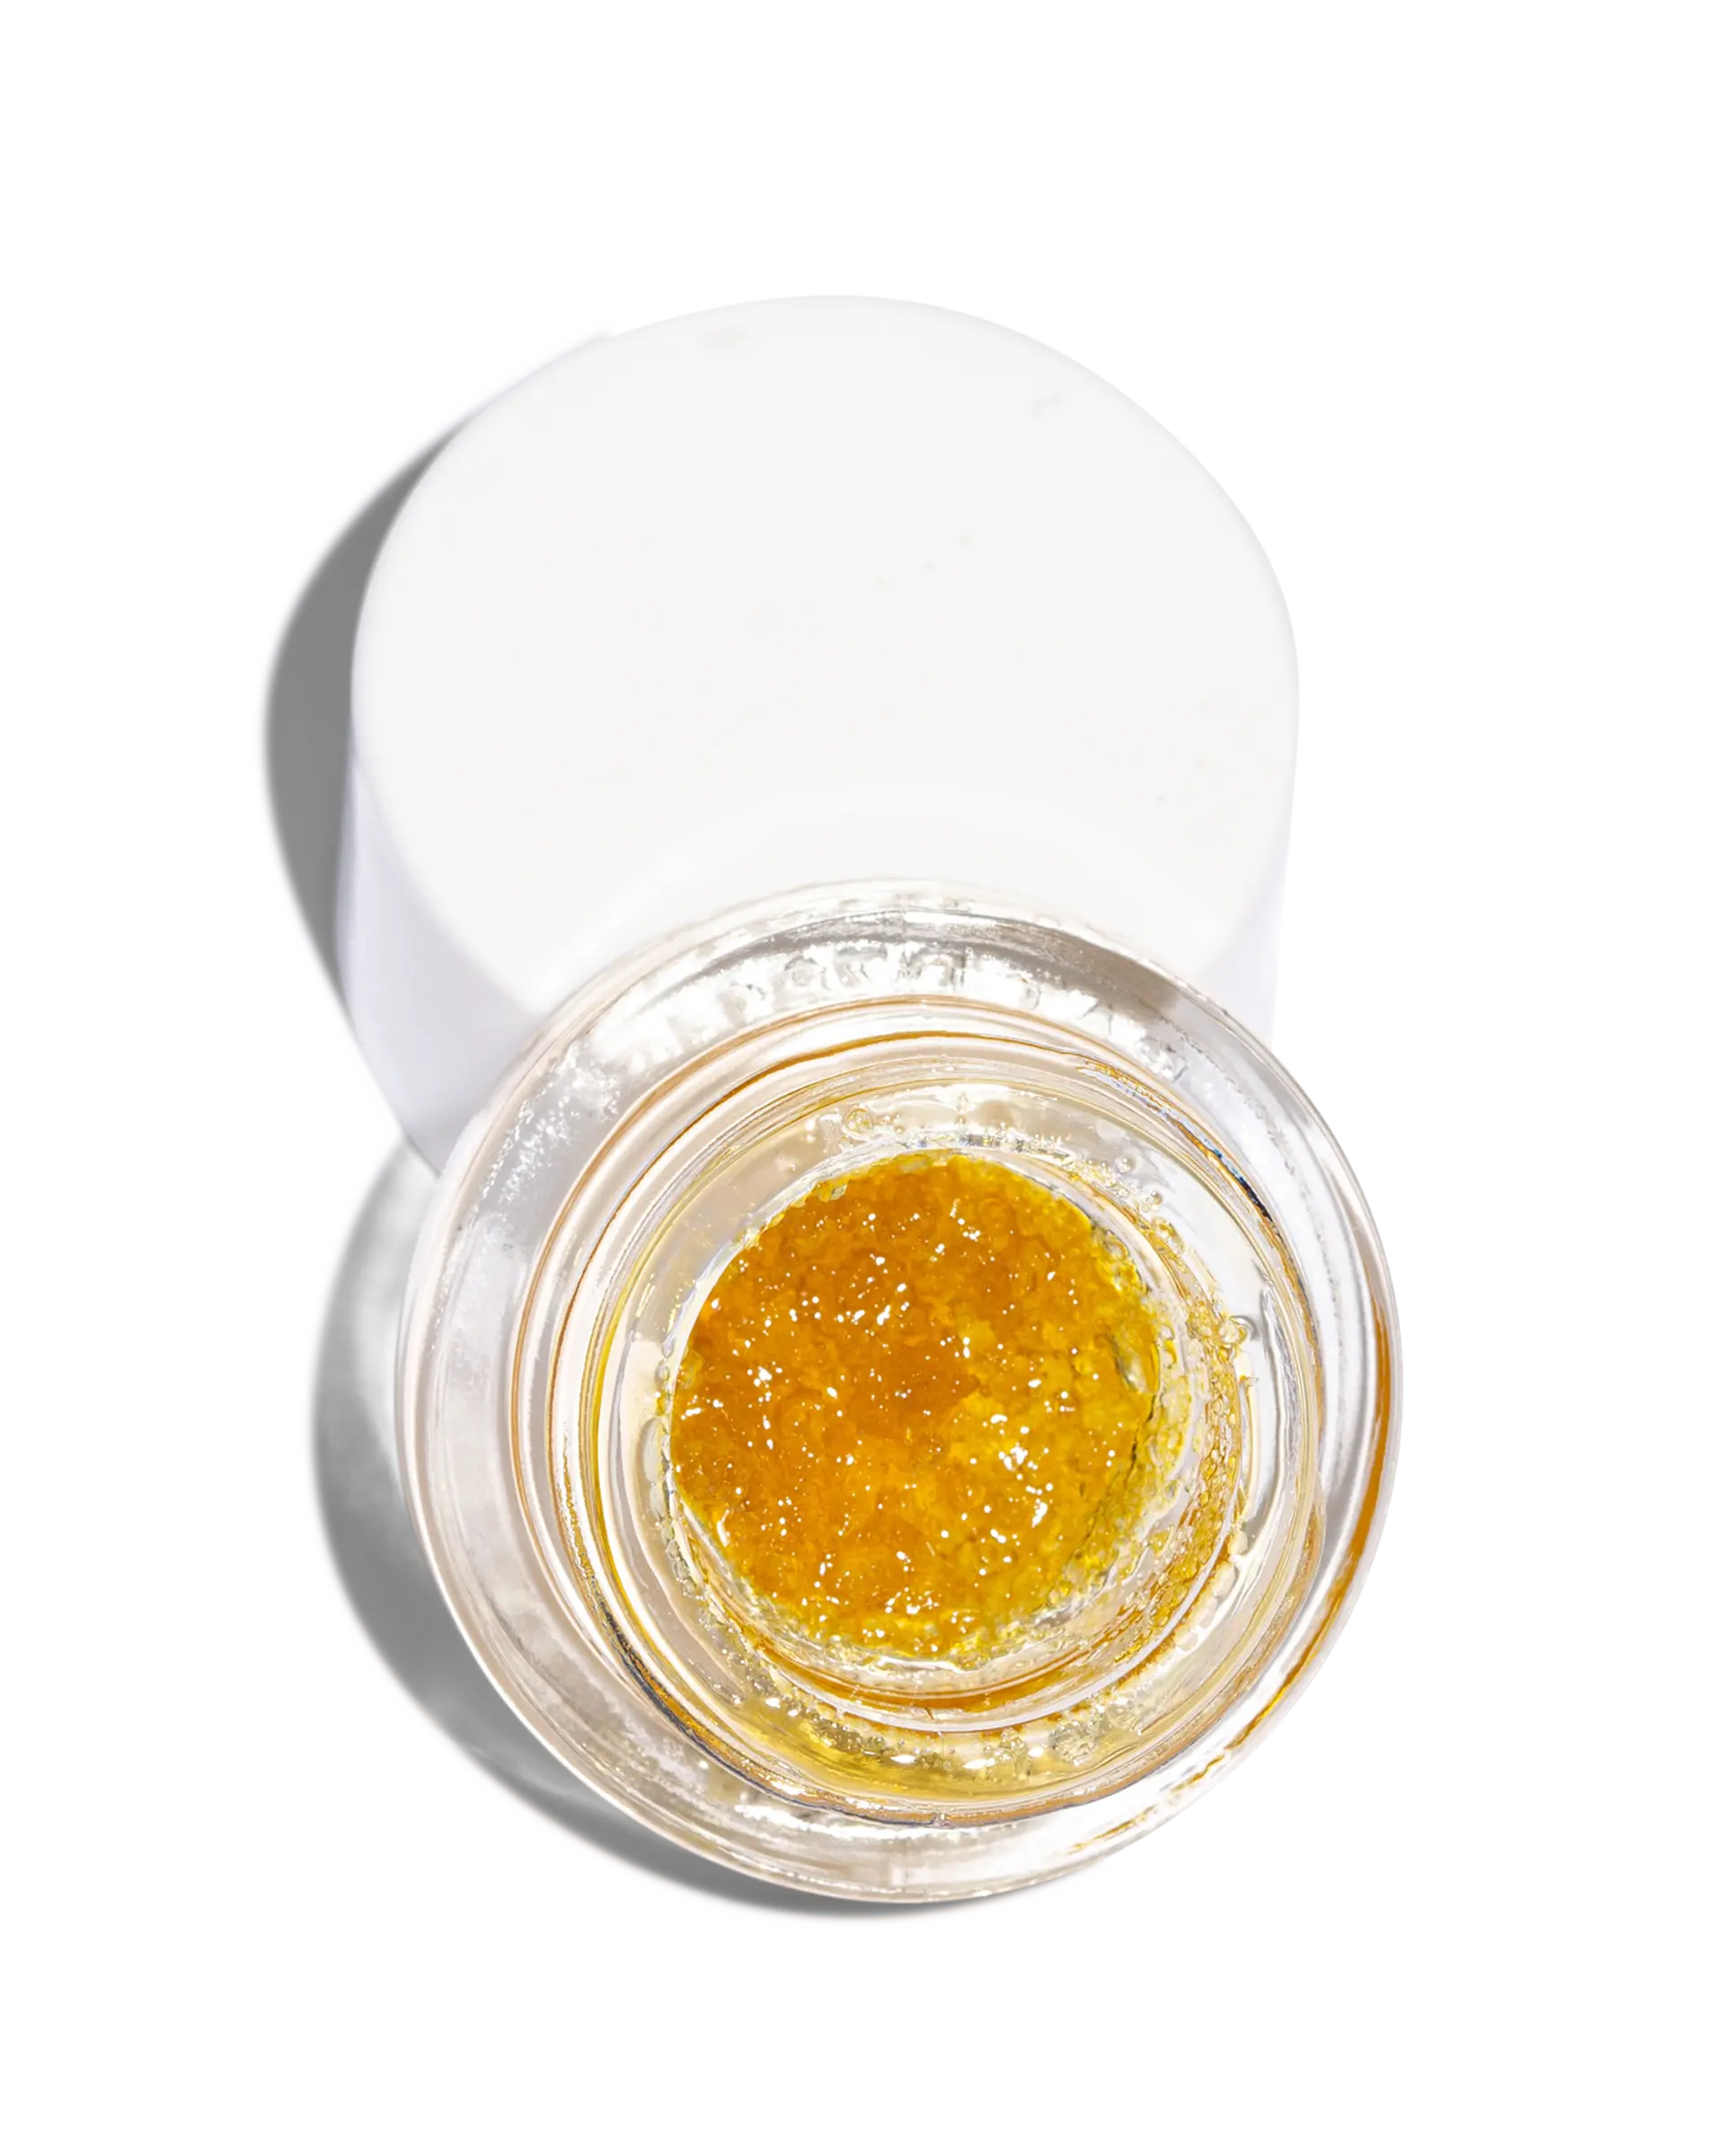 Tangie Live Resin 0.5g, 1 of 2